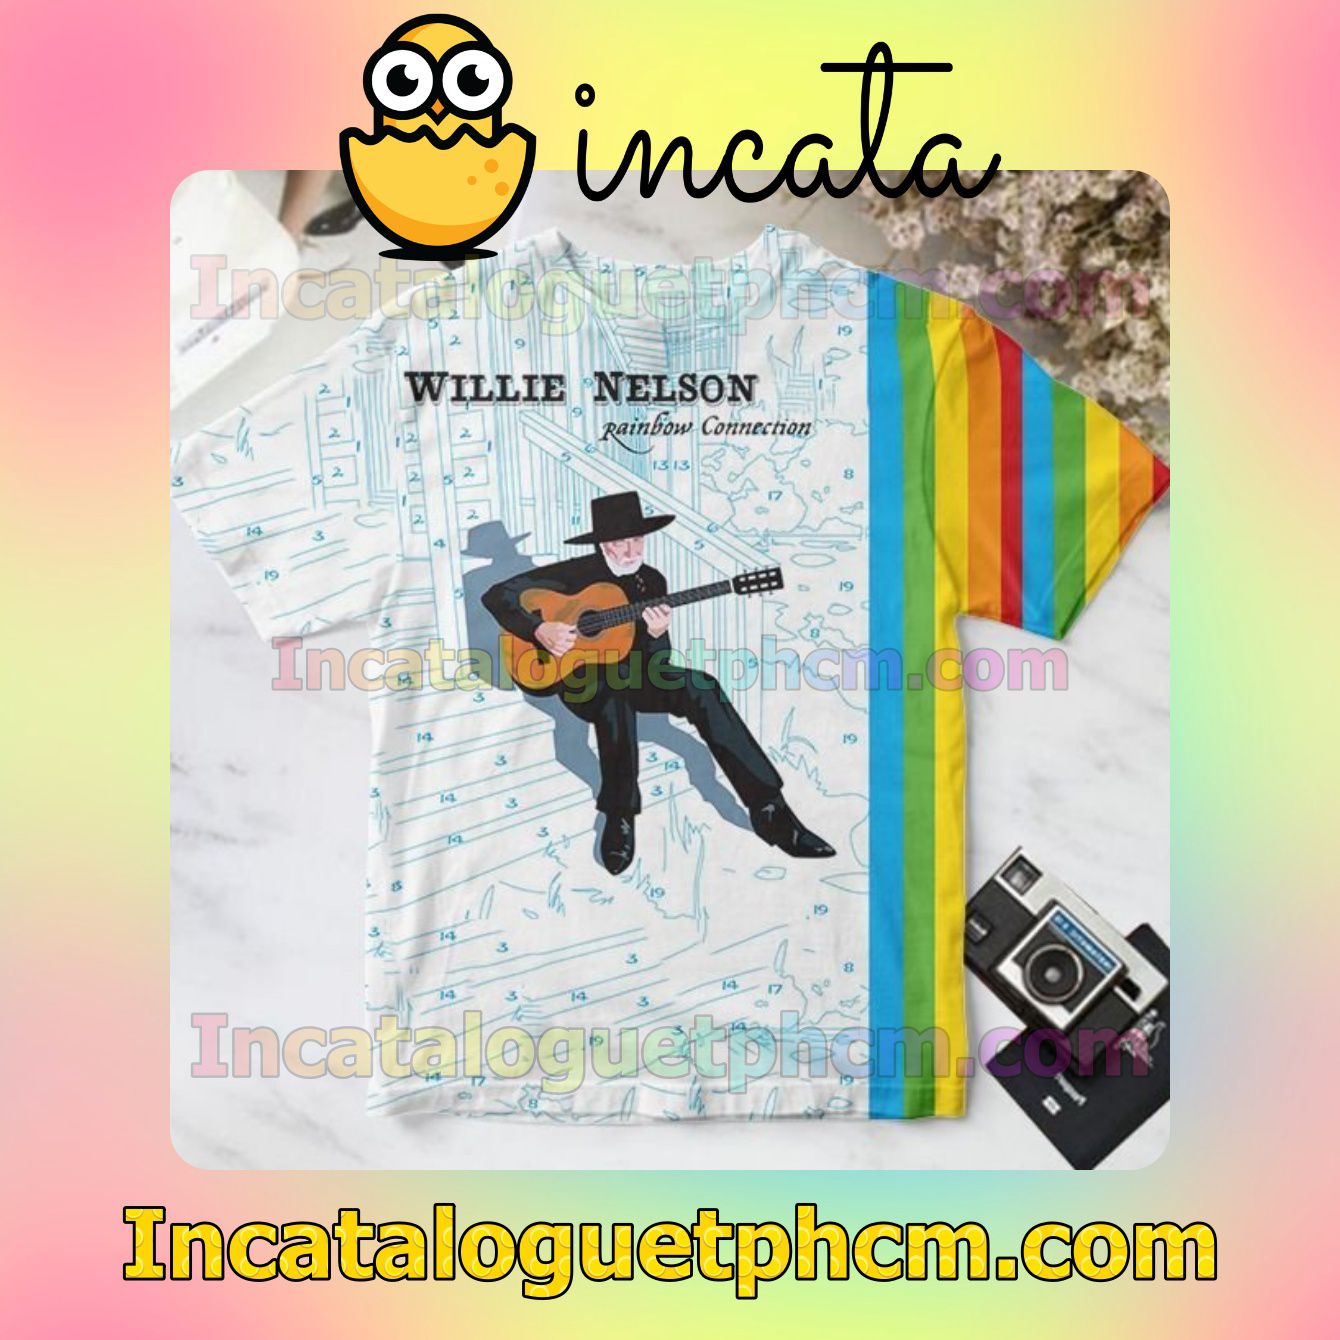 Willie Nelson Rainbow Connection Album Cover Personalized Shirt